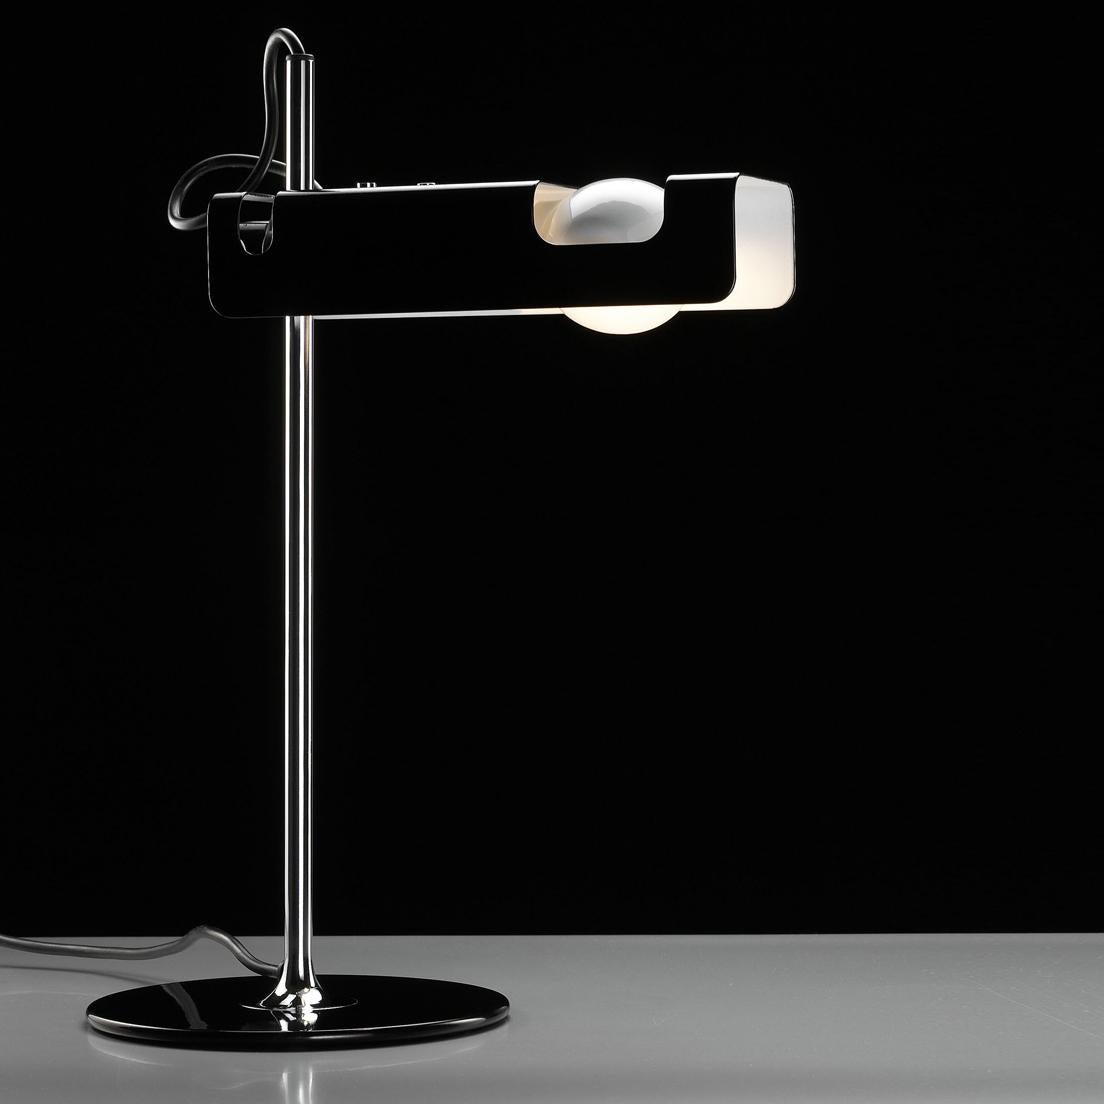 Table lamp 'Spider' designed by Joe Colombo in 1965.
Table lamp giving direct light, lacquered metal base, chromium-plated stem, adjustable reflector in lacquered aluminium.
Manufactured by Oluce, Italy.

Table or floor lamp with stove-enameled